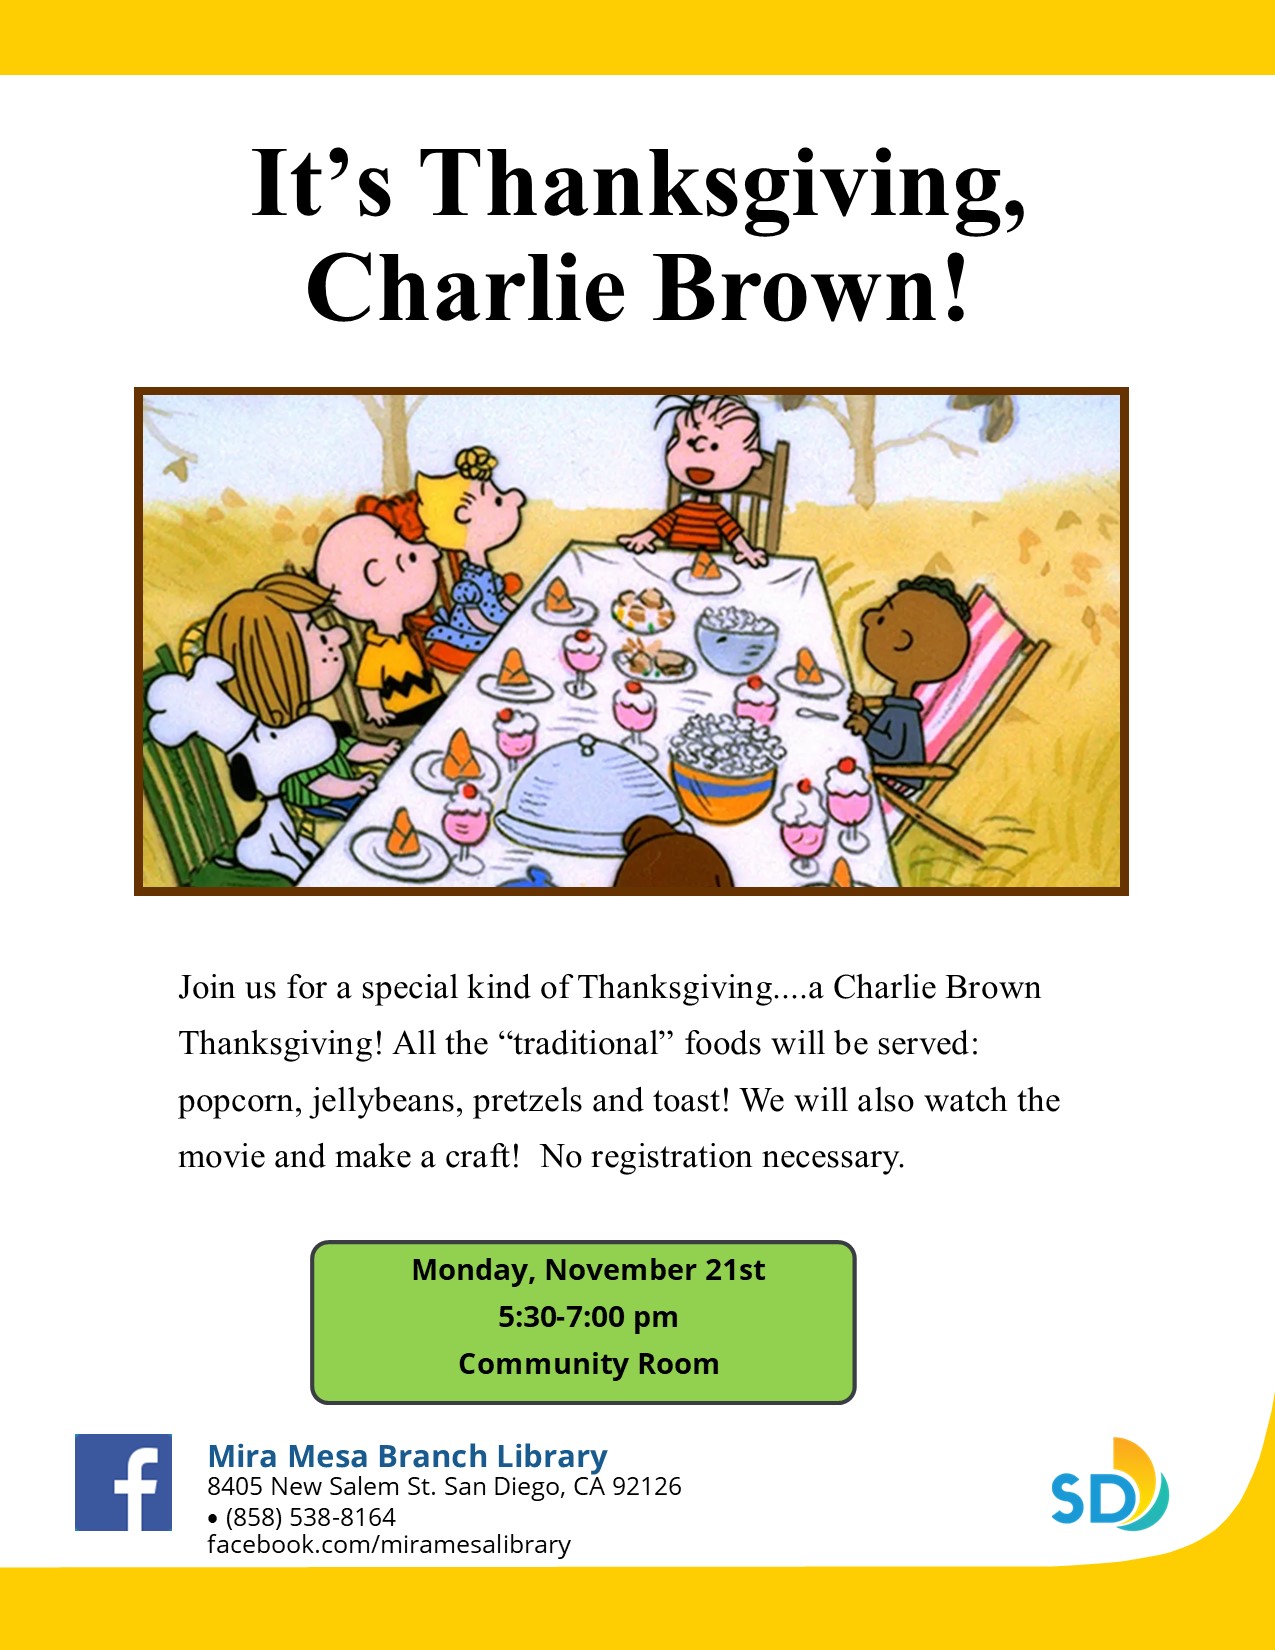 Charlie Brown characters sitting at Thanksgiving table.